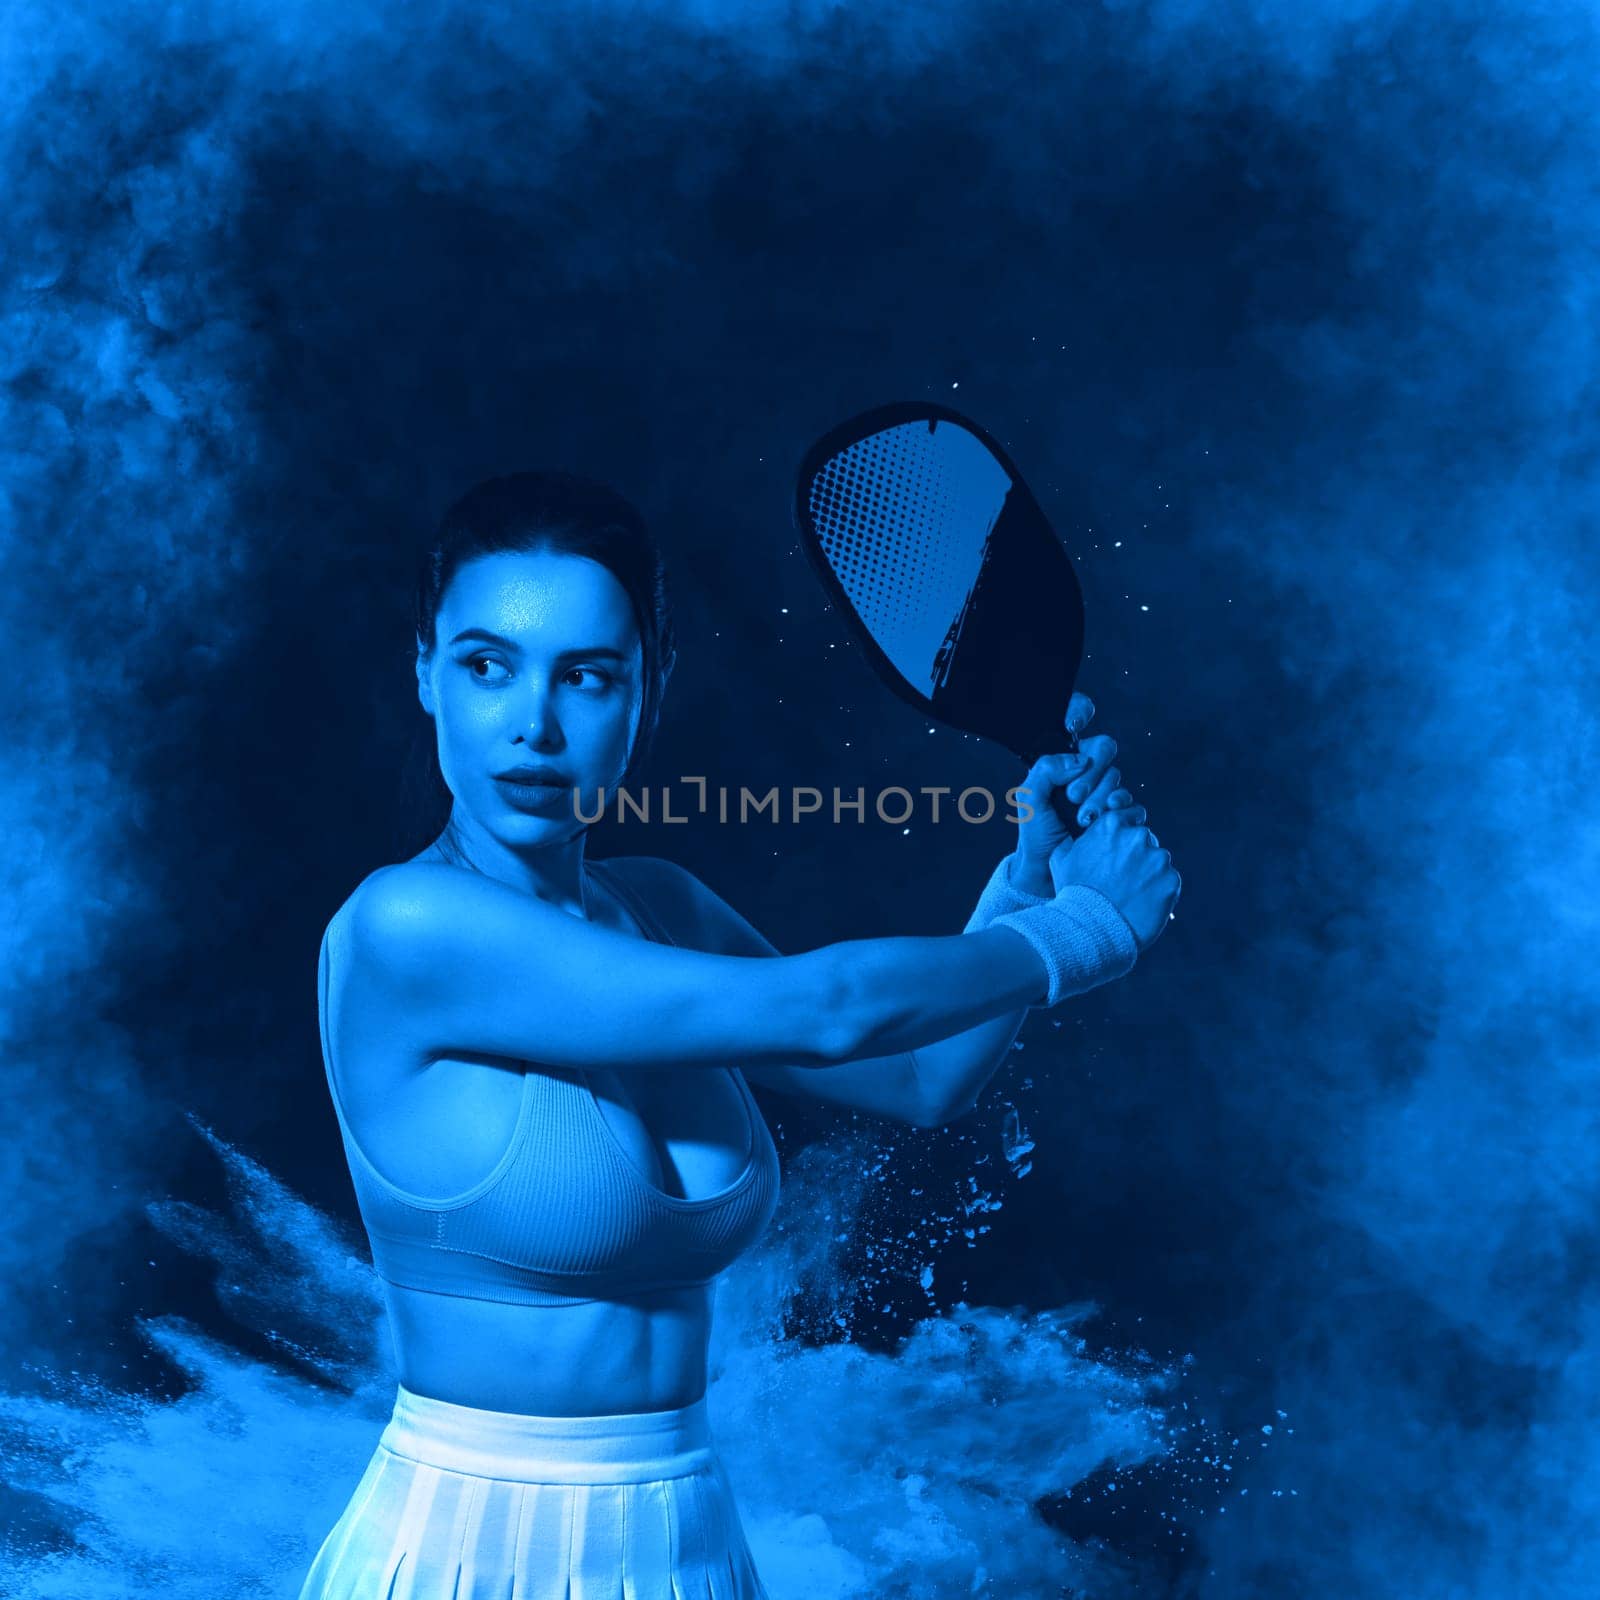 Pickleball tennis player with racket on the court. Sport court and balls. Download a high quality photo with paddle for the design of a sports app or social media advertisement